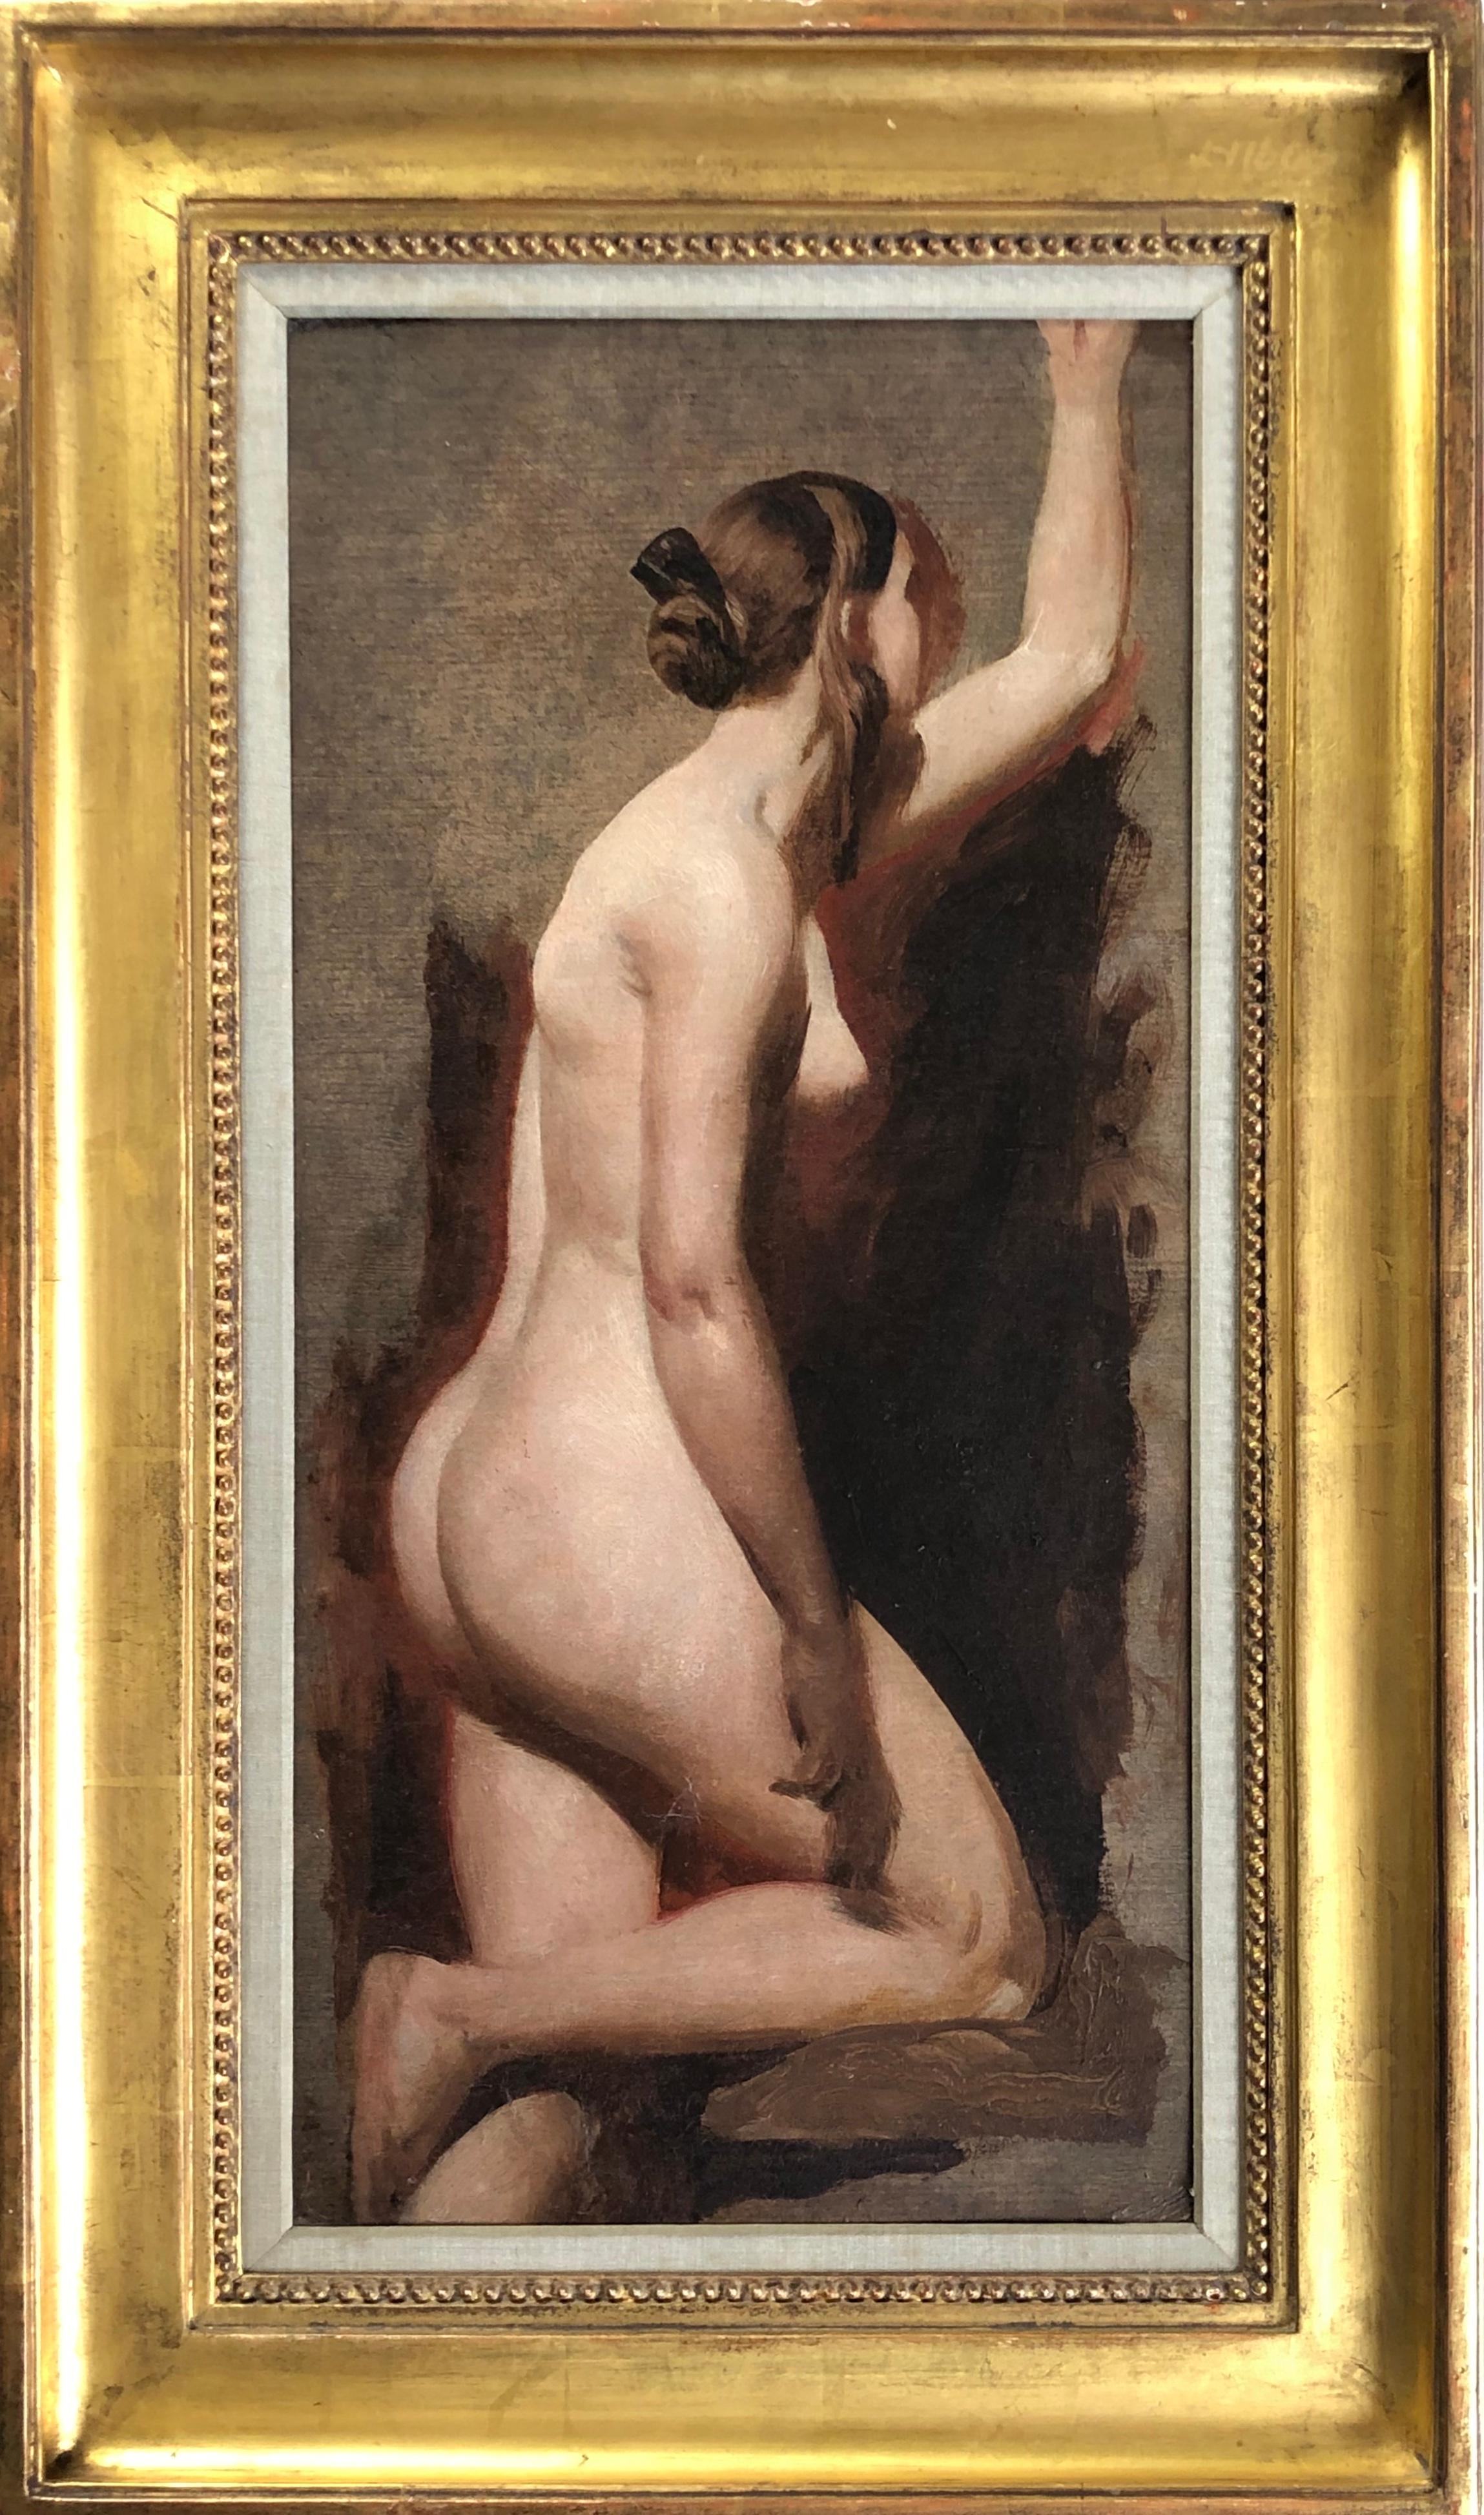 William Etty R.A. Figurative Painting - 19th Century English Portrait of a Female Nude